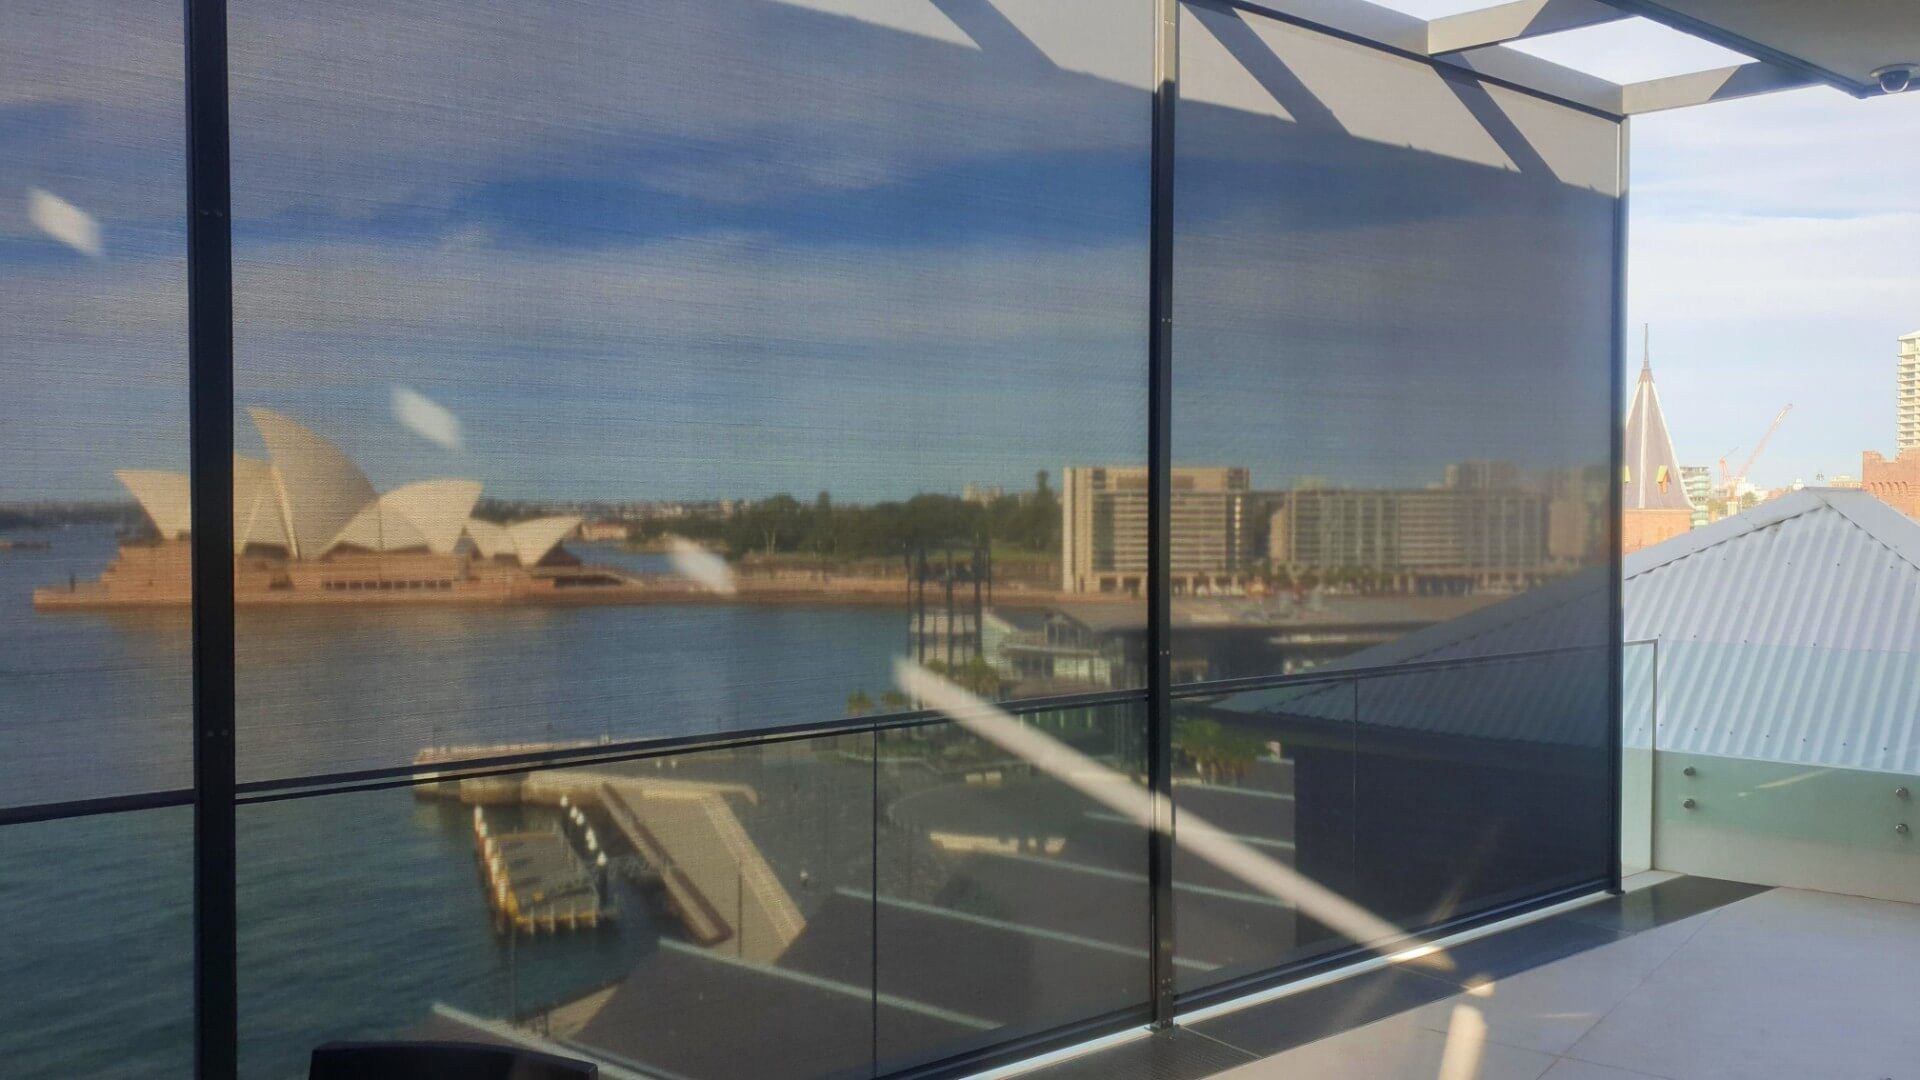 ZIP awnings installed on a balcony overlooking the Sydney Opera house in Sydney